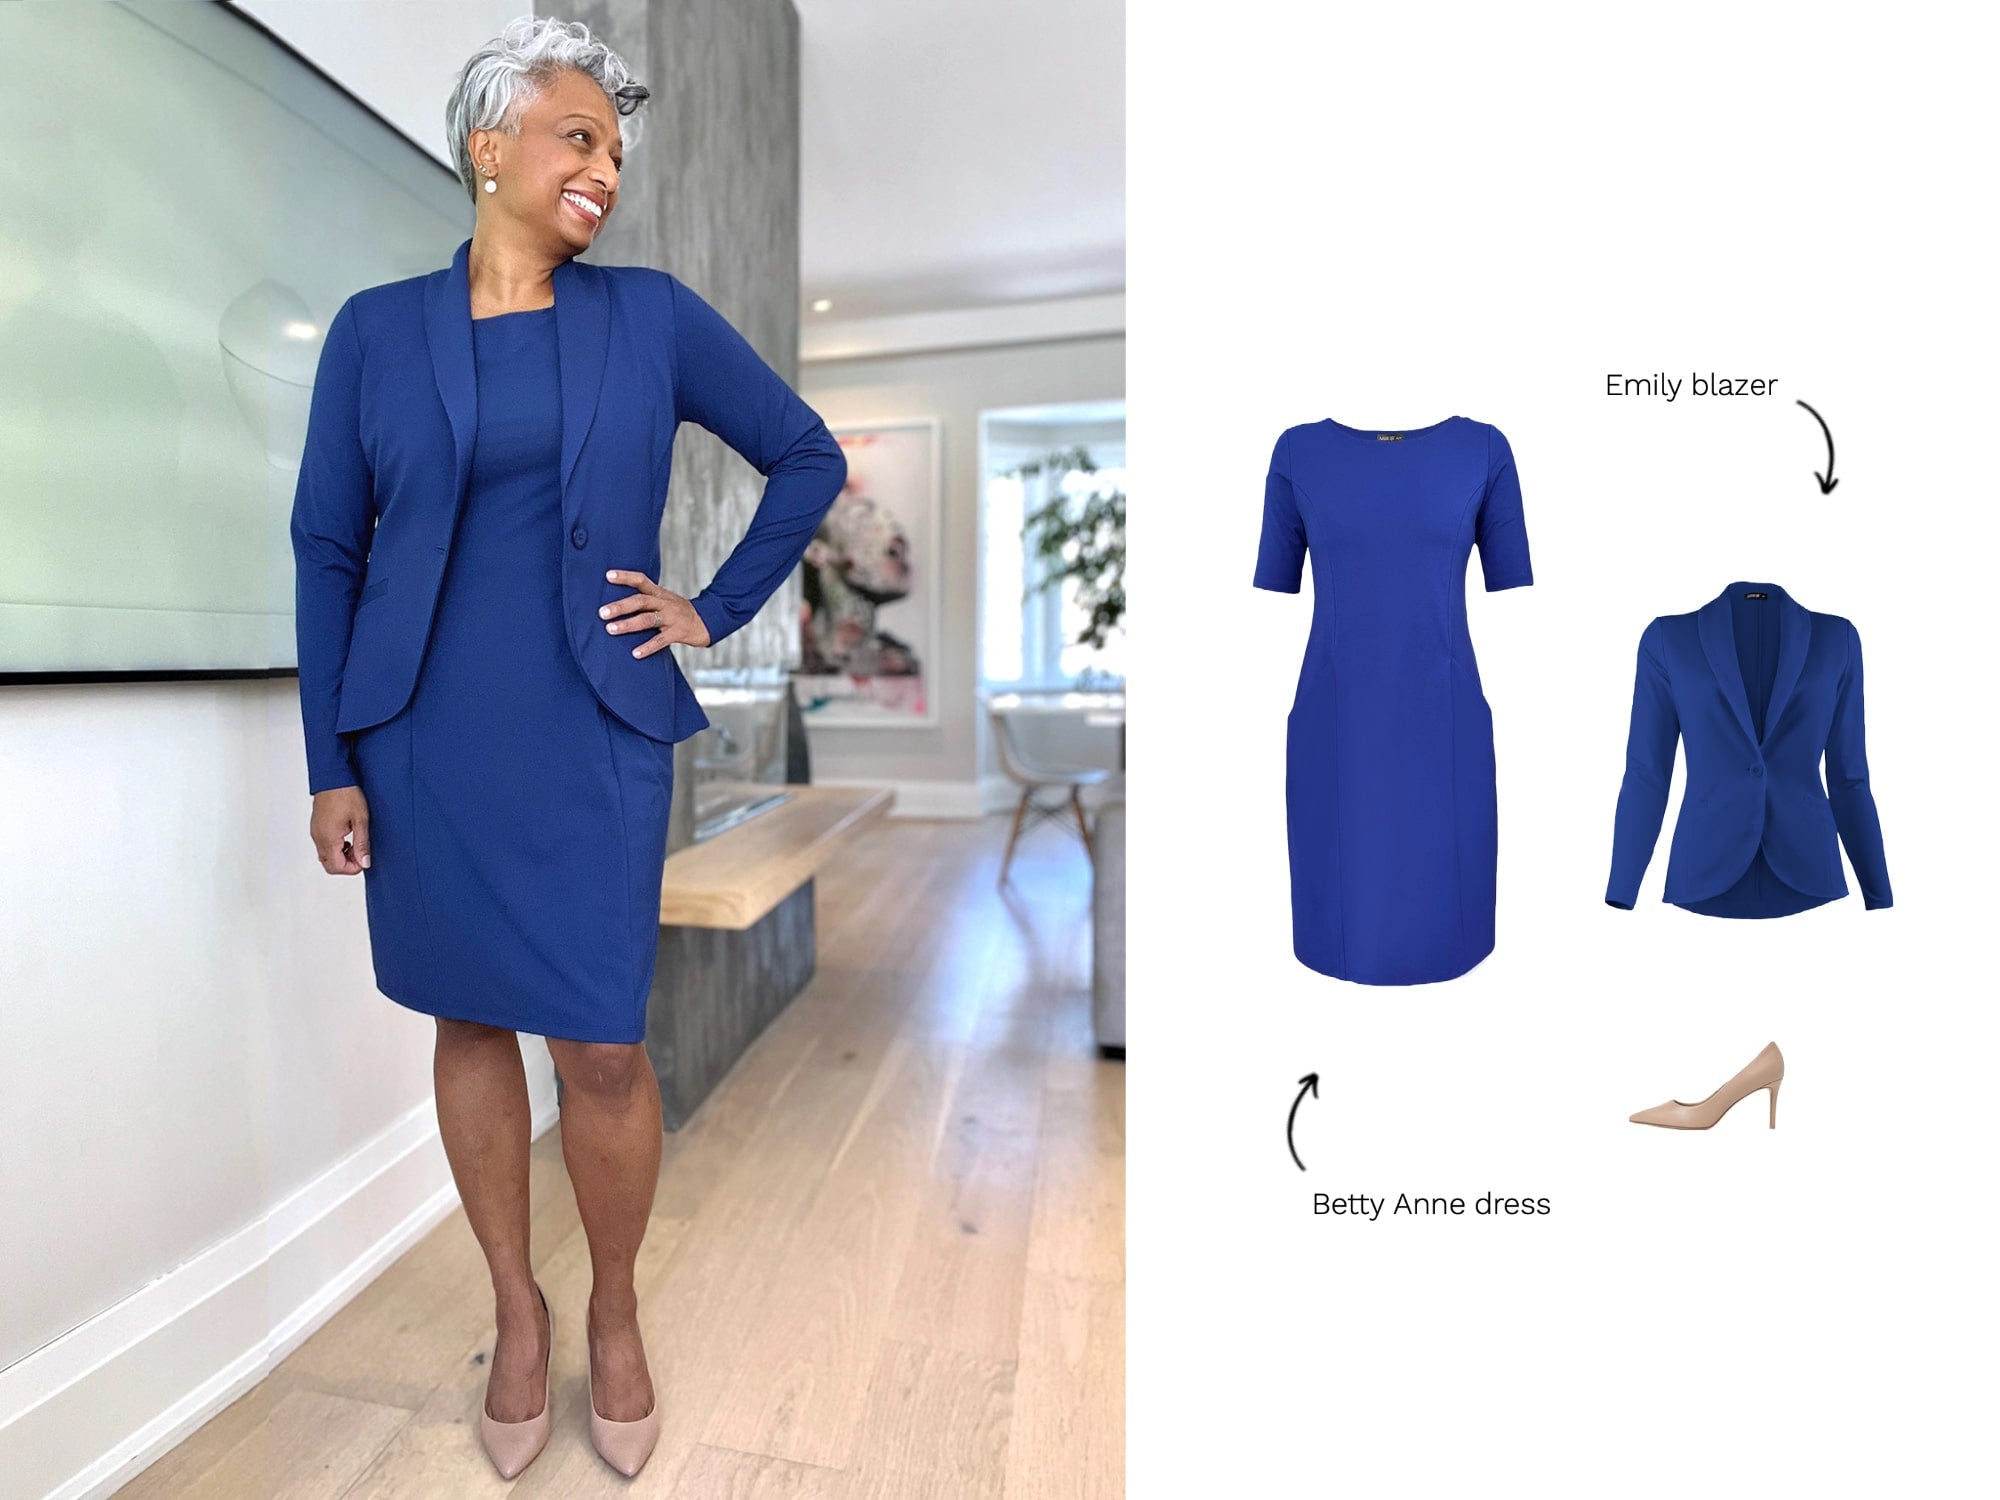 Image of Miik model wearing a tailored pocket dress in blue with a matching blazer, with the off figures of her outfit to the right.